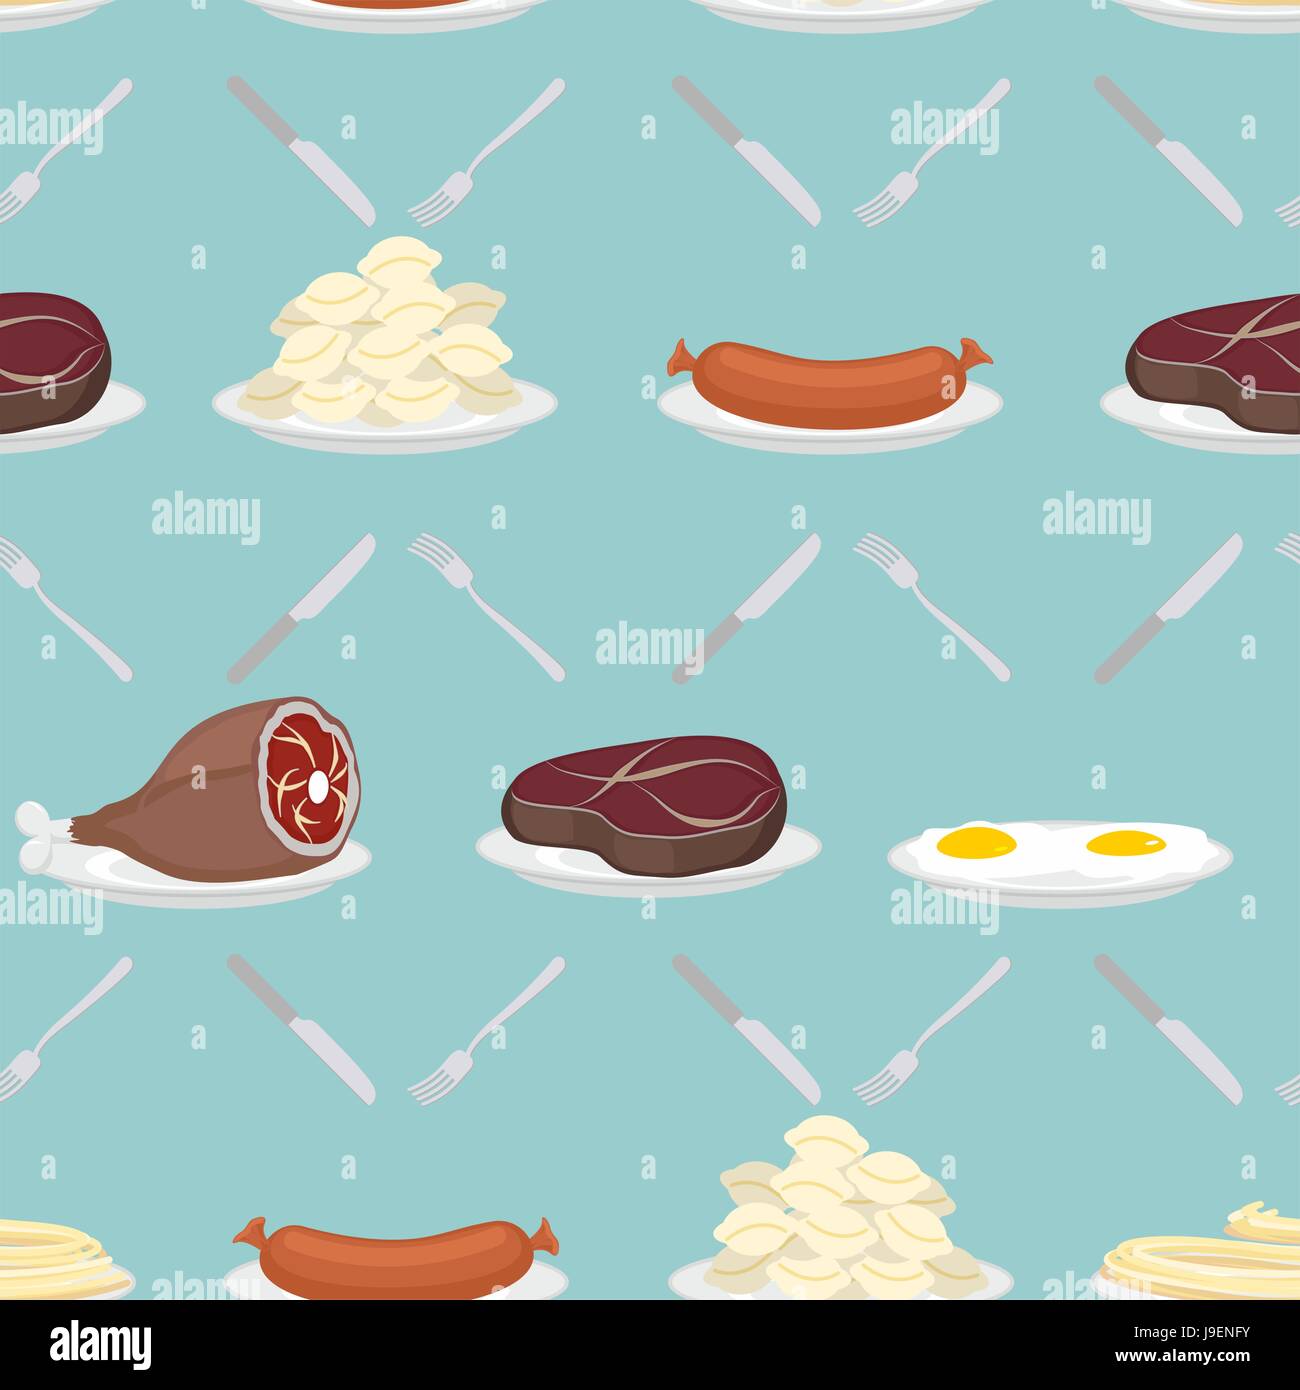 Food Clipart-butcher holding knife with meats hanging in background clipart